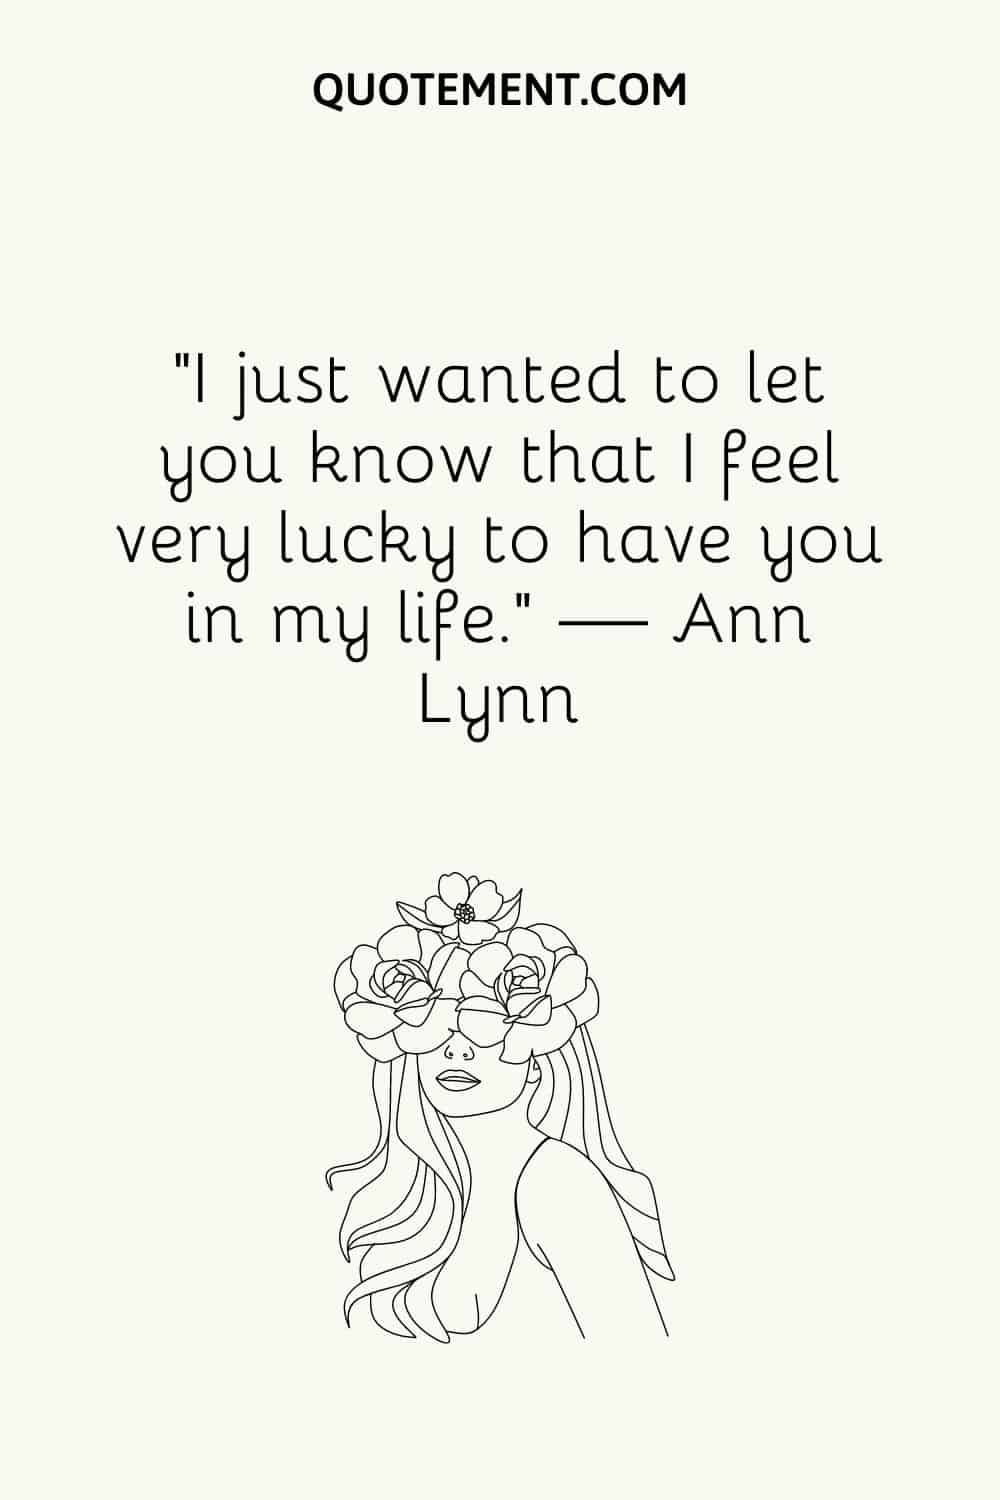 “I just wanted to let you know that I feel very lucky to have you in my life.” — Ann Lynn